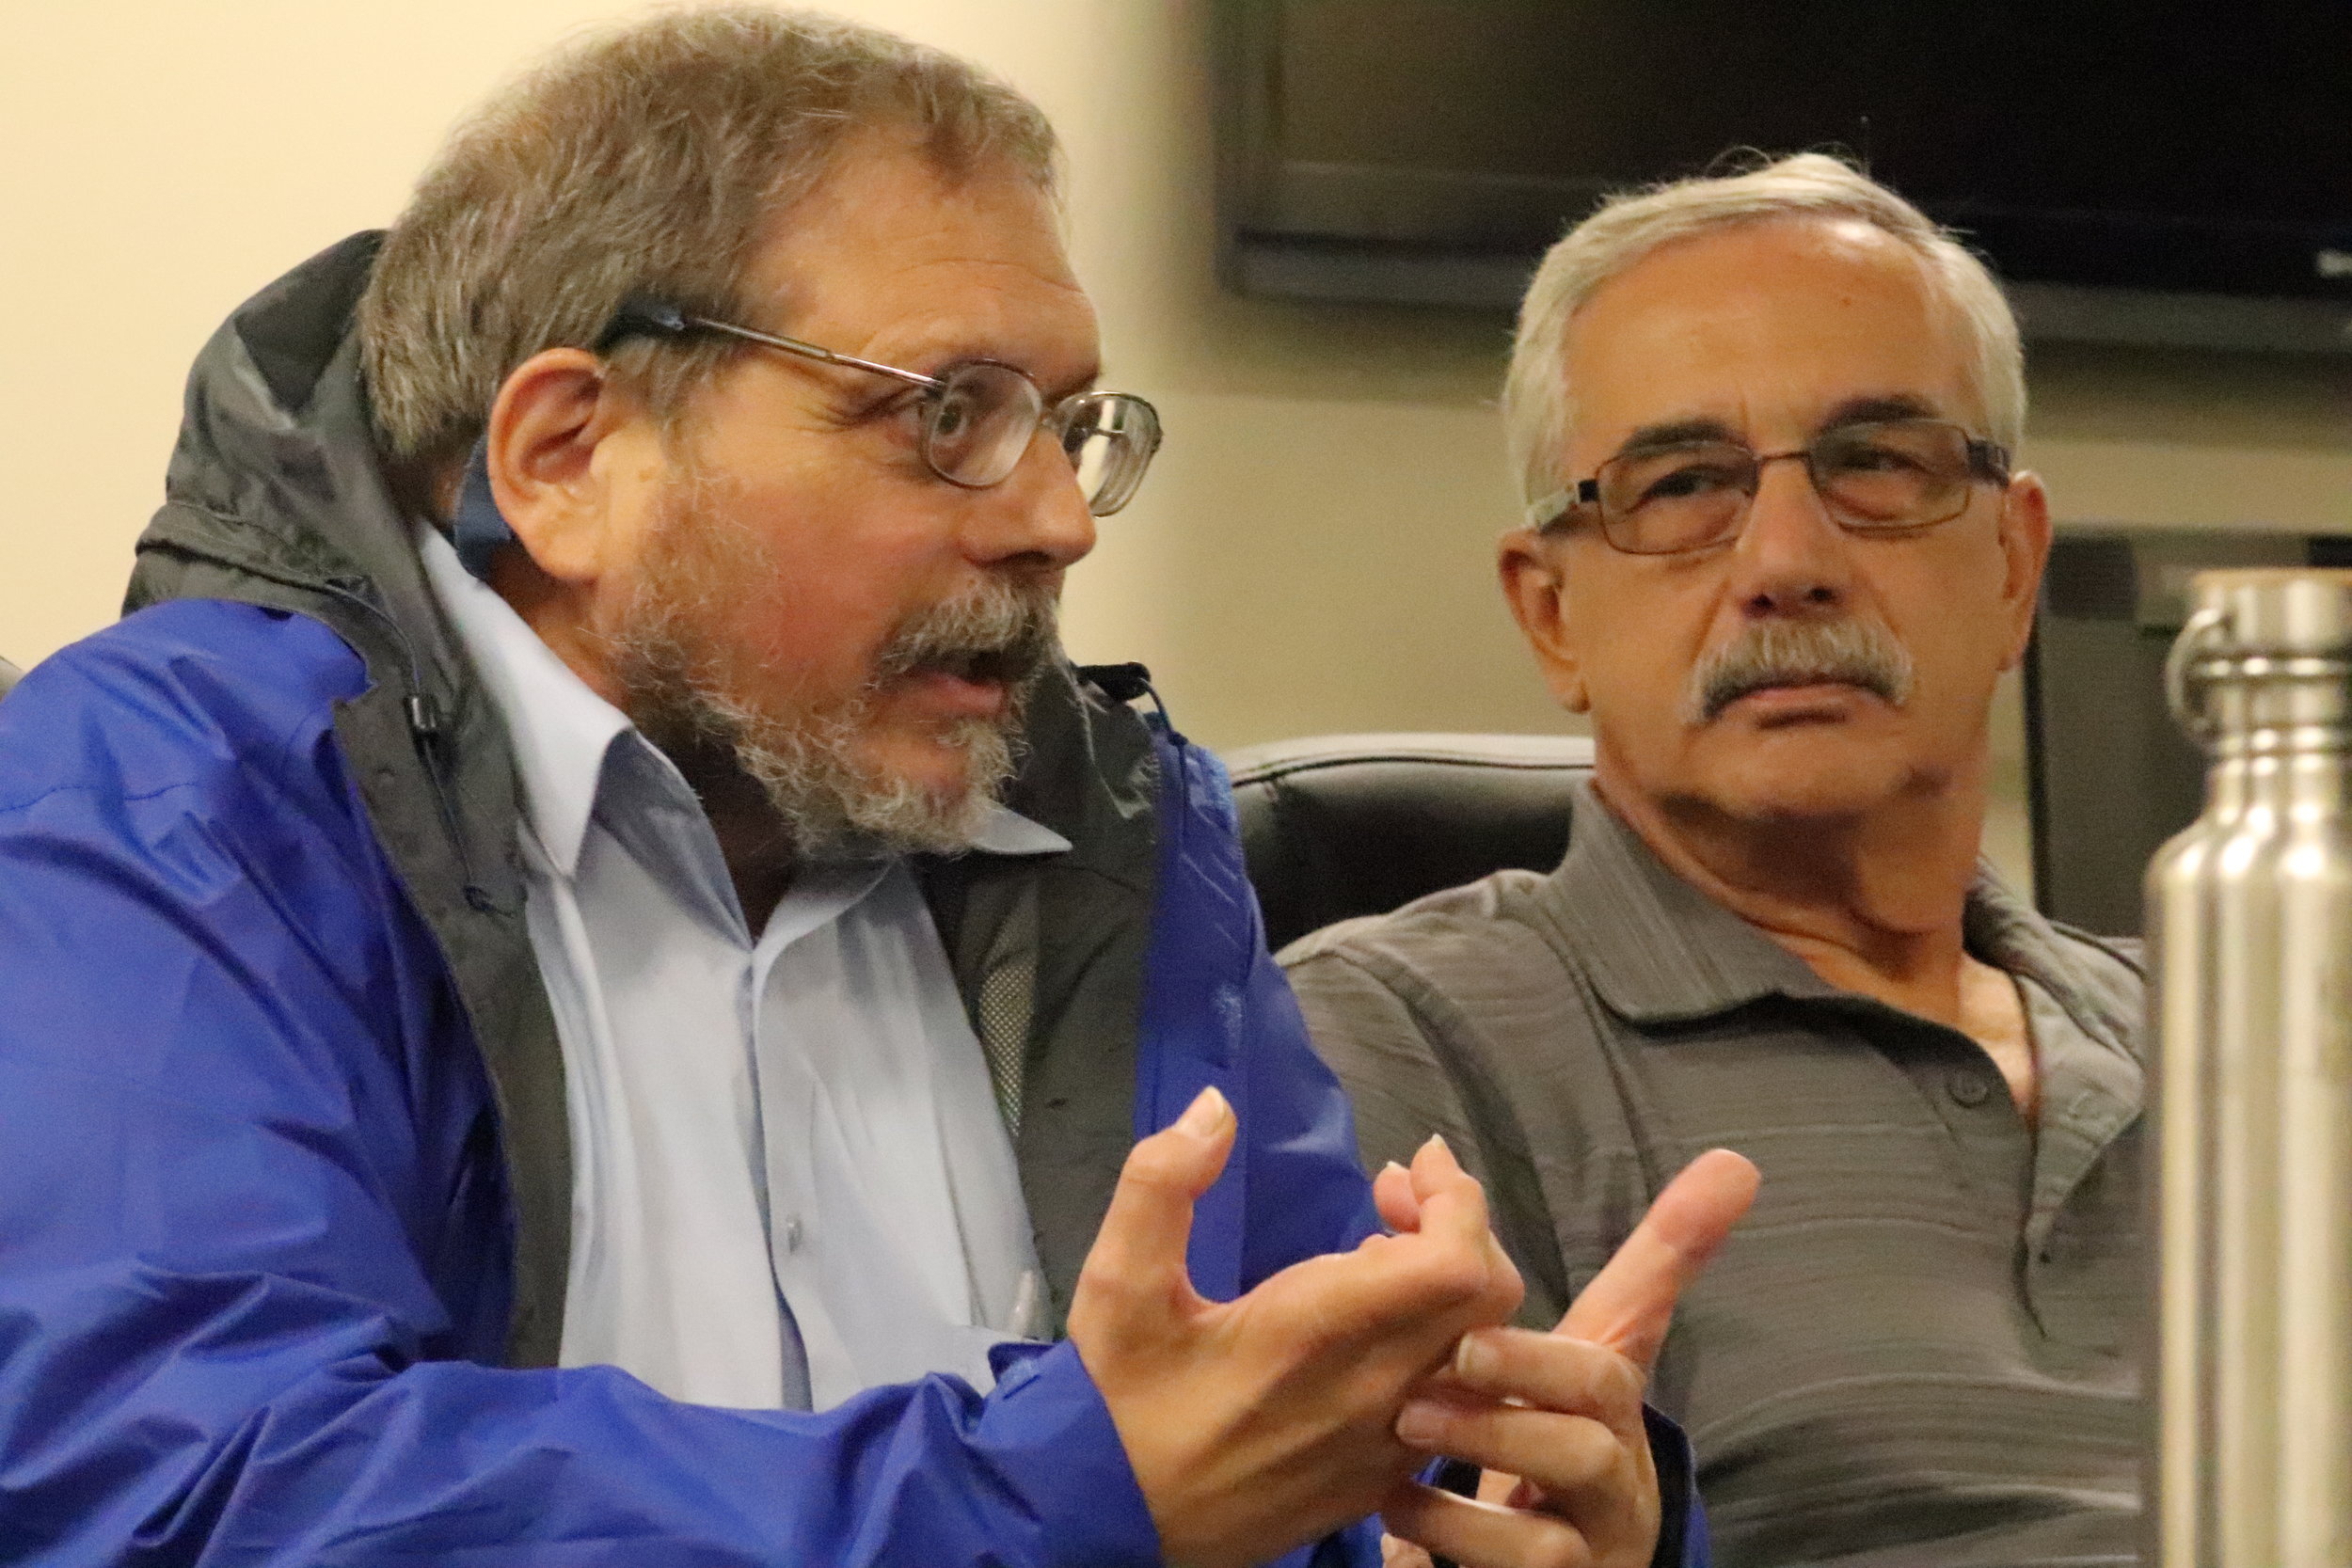  Dominick Casolaro and Joe Ingemie, ACPAC members, discuss their experience on the committee. 